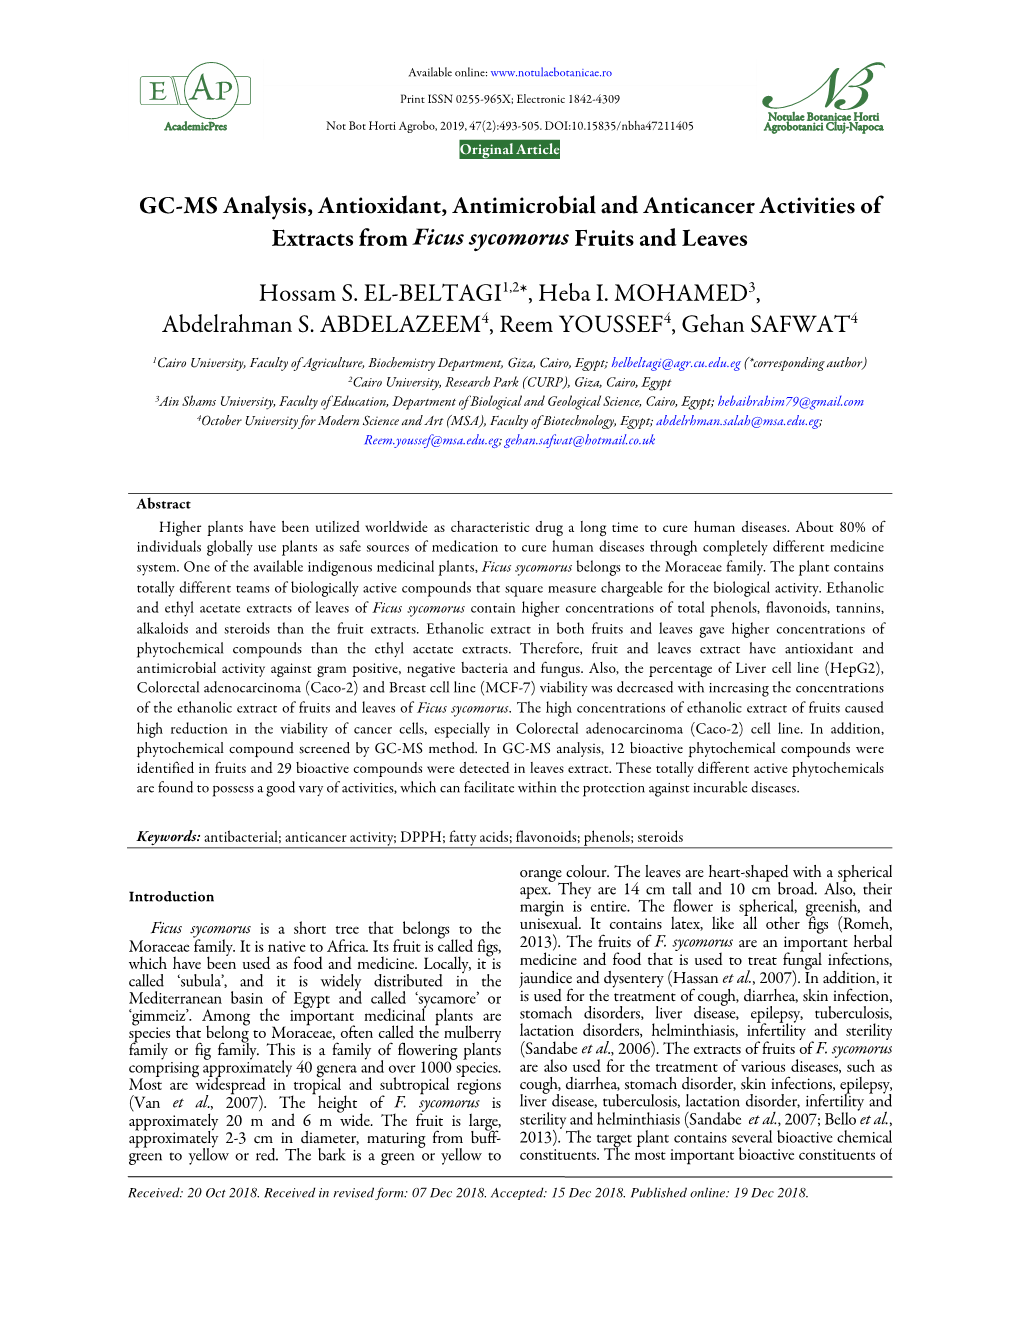 GC-MS Analysis, Antioxidant, Antimicrobial and Anticancer Activities of Extracts from Ficus Sycomorus Fruits and Leaves